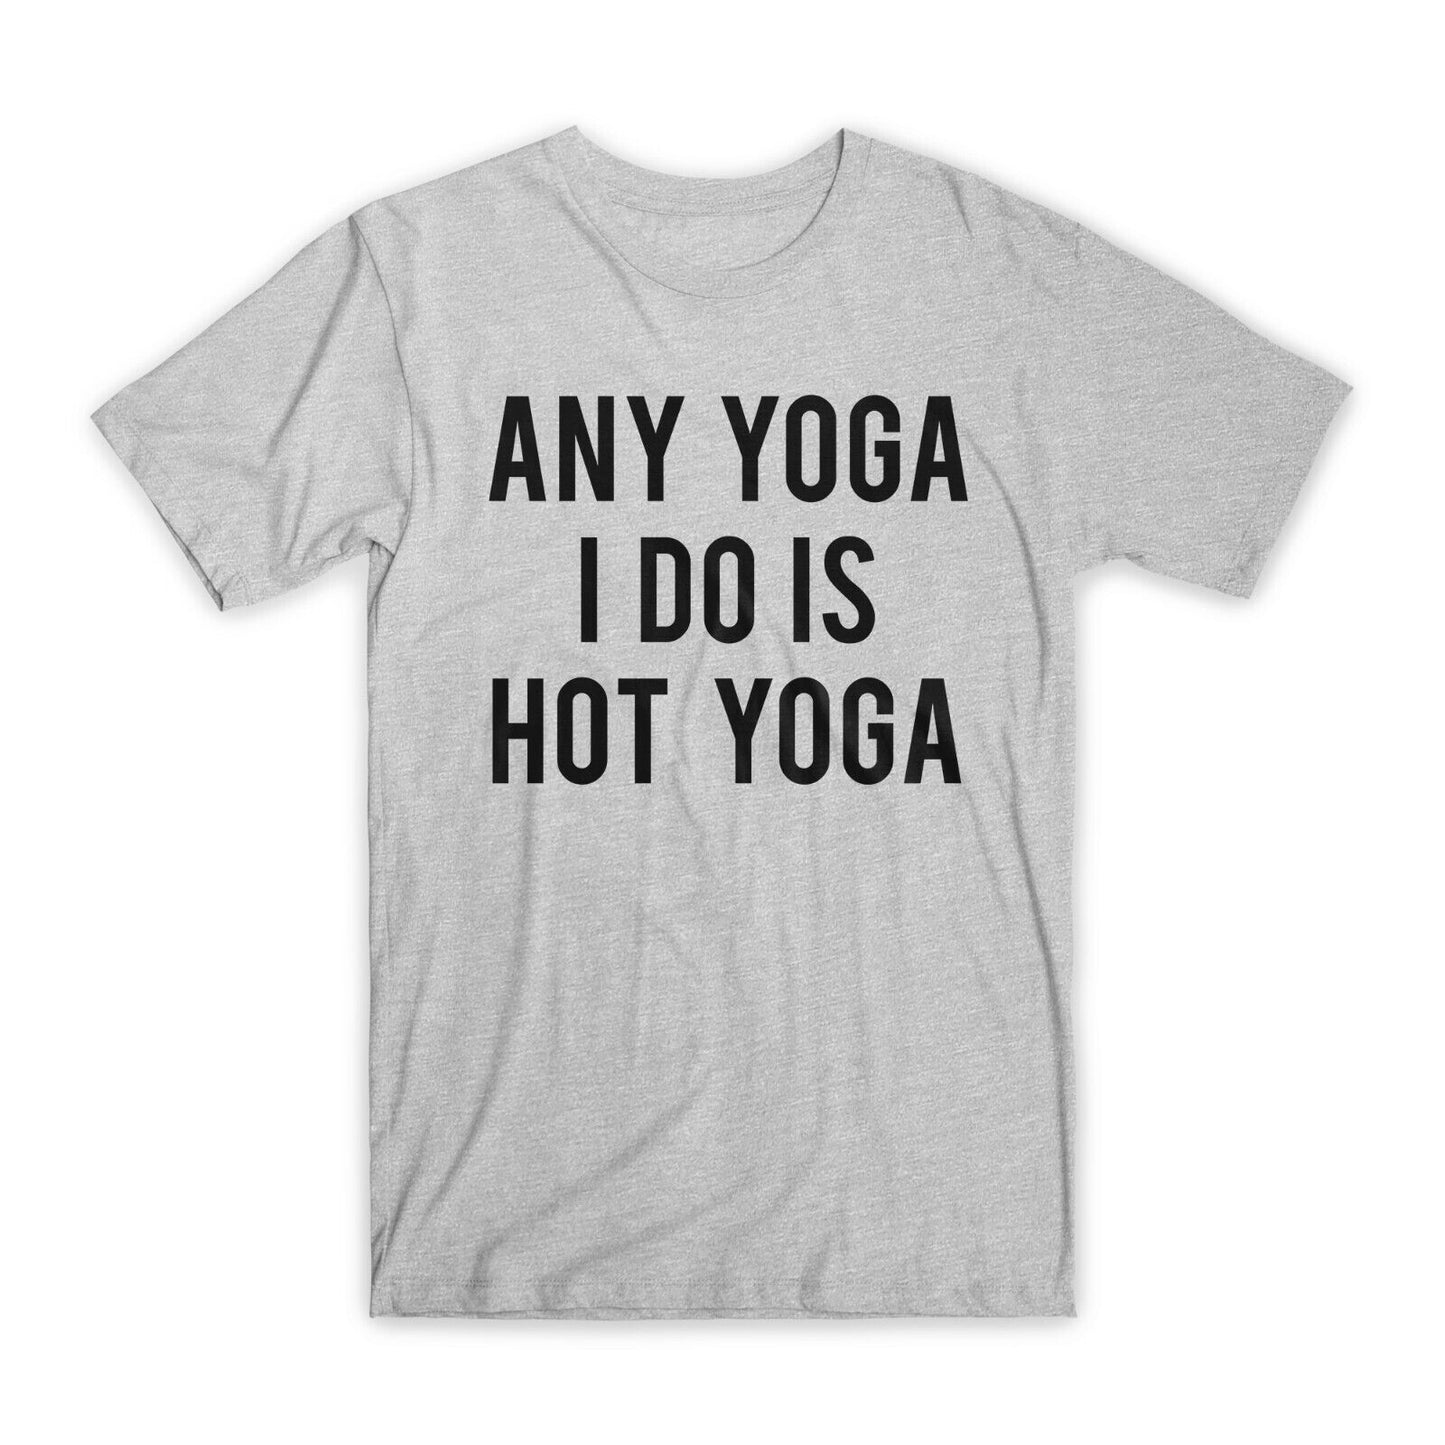 Any Yoga I Do is Hot Yoga T-Shirt Premium Cotton Crew Neck Funny Tees Gifts NEW